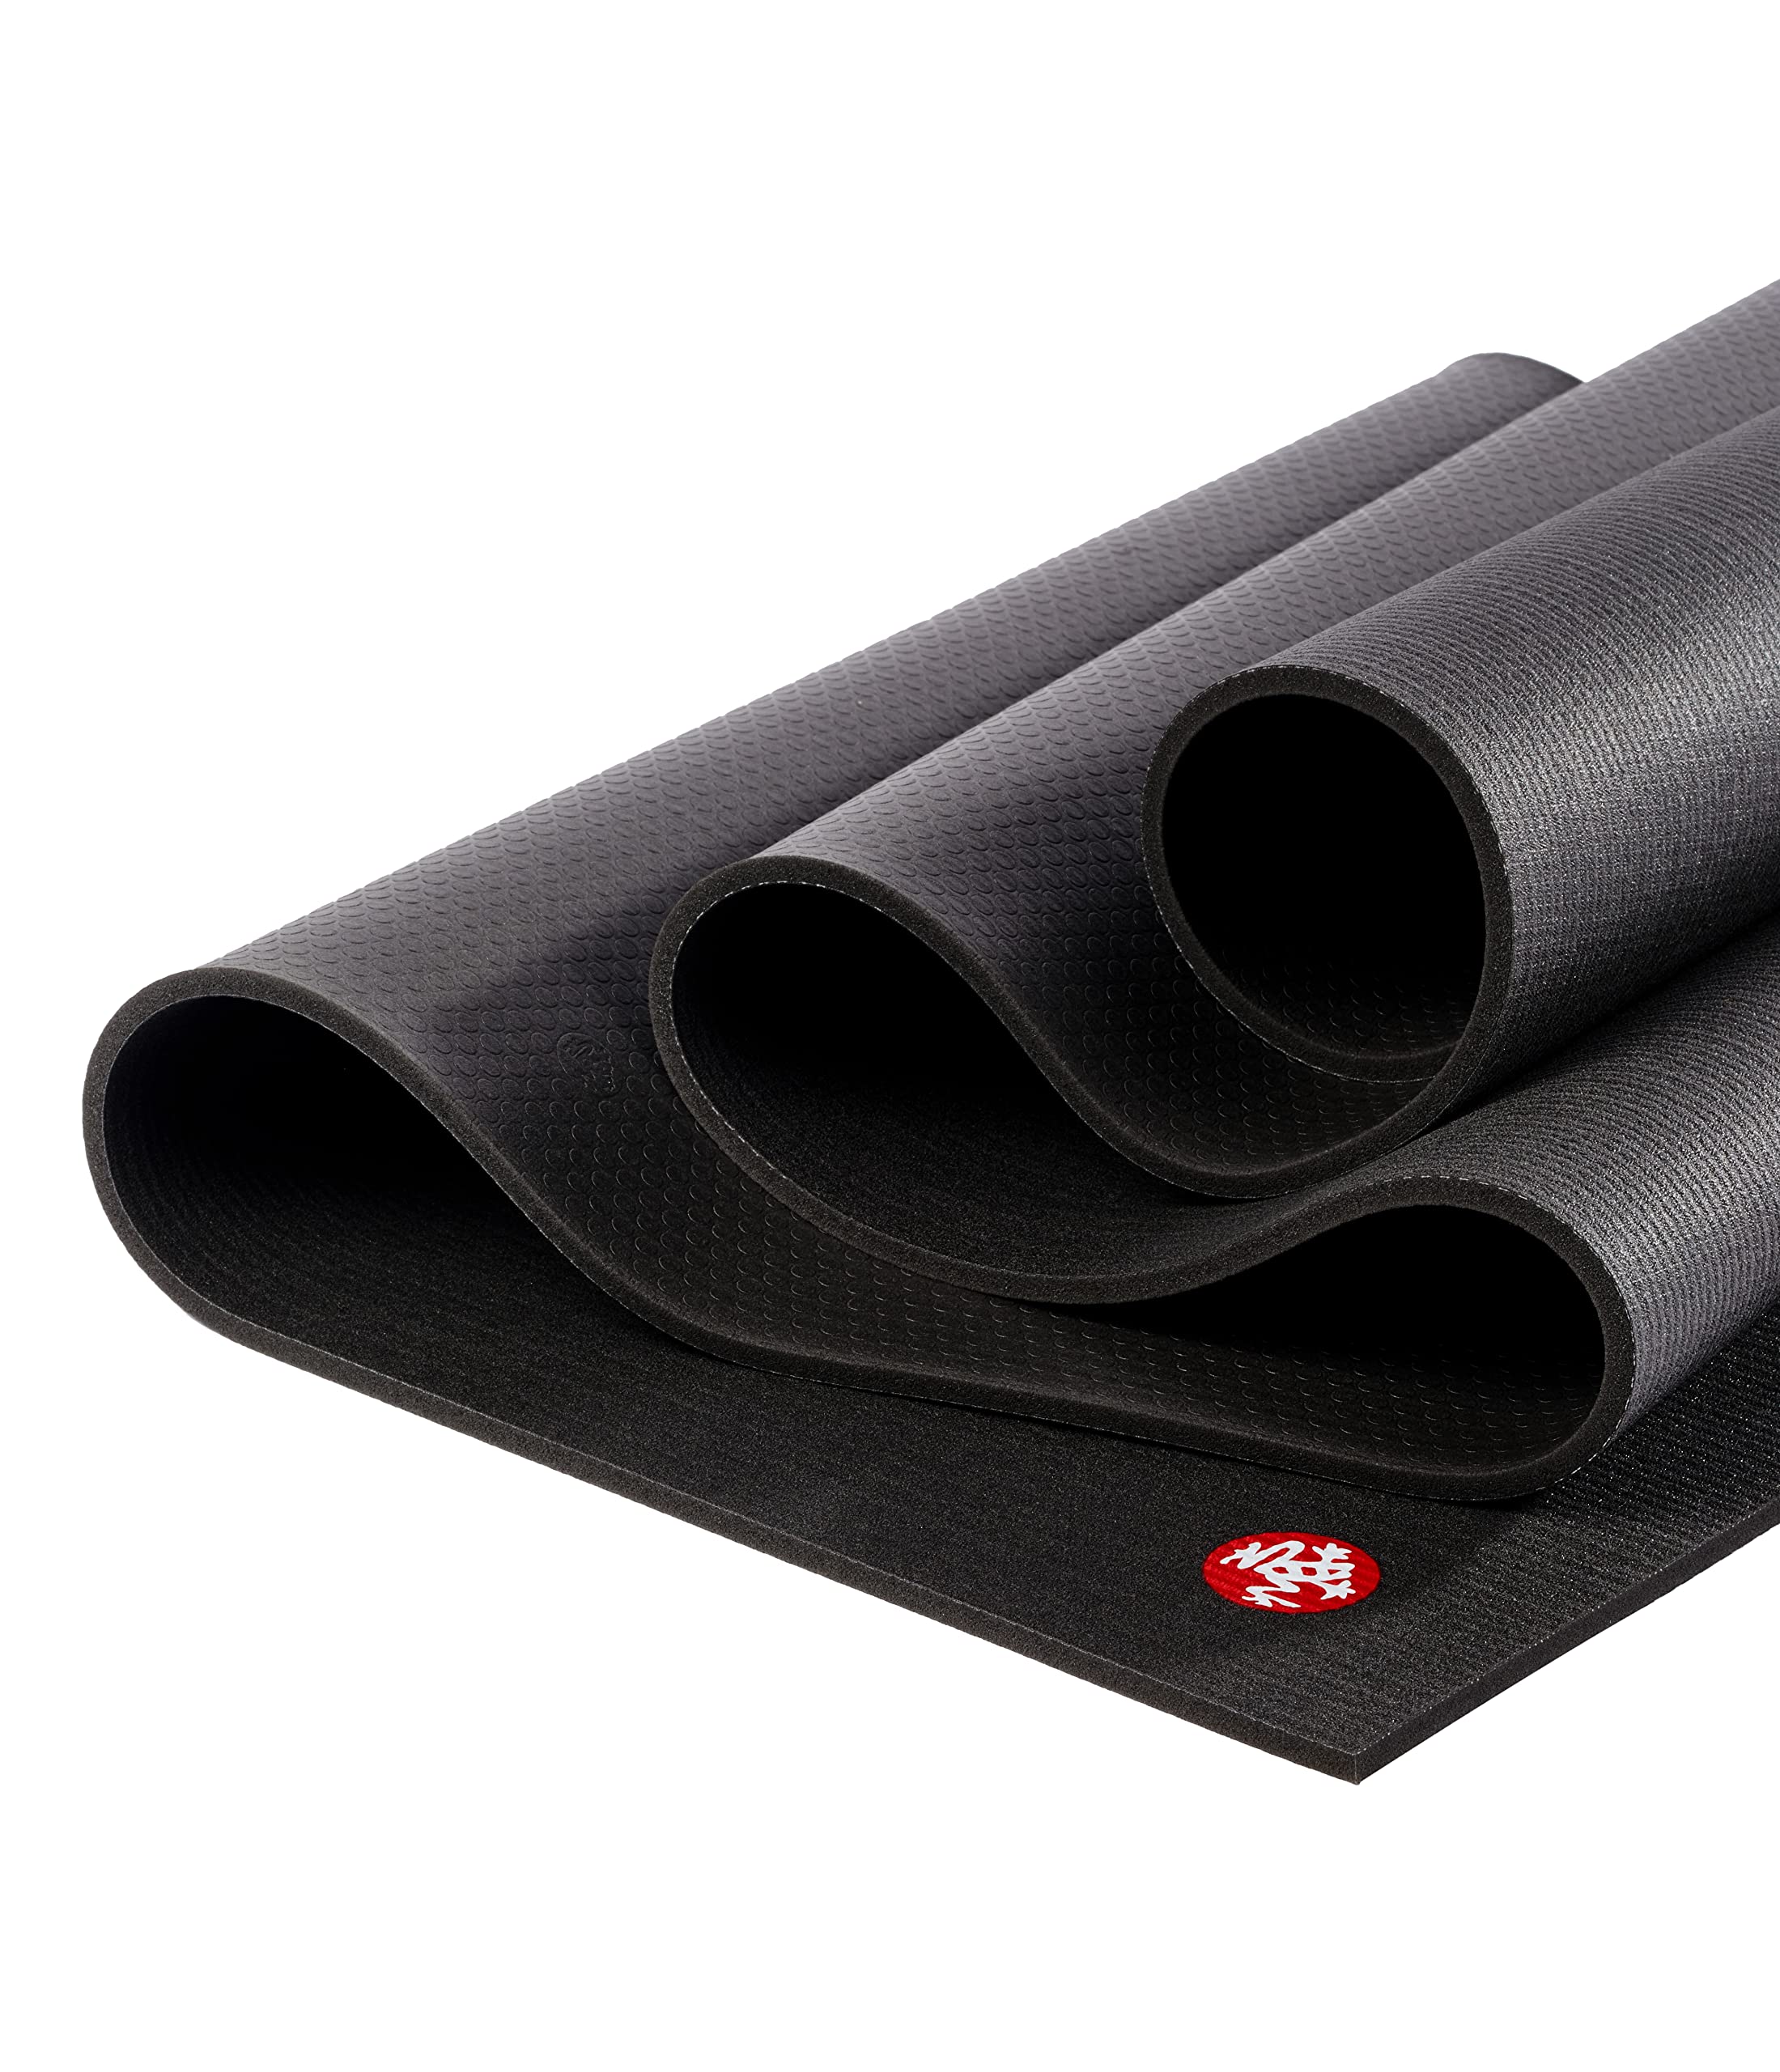 Manduka PRO Yoga Mat - Multipurpose Exercise Mat for Yoga, Pilates, and Home Workout, Built to Last a Lifetime, 6mm Thick Cushion for Joint Support and Stability